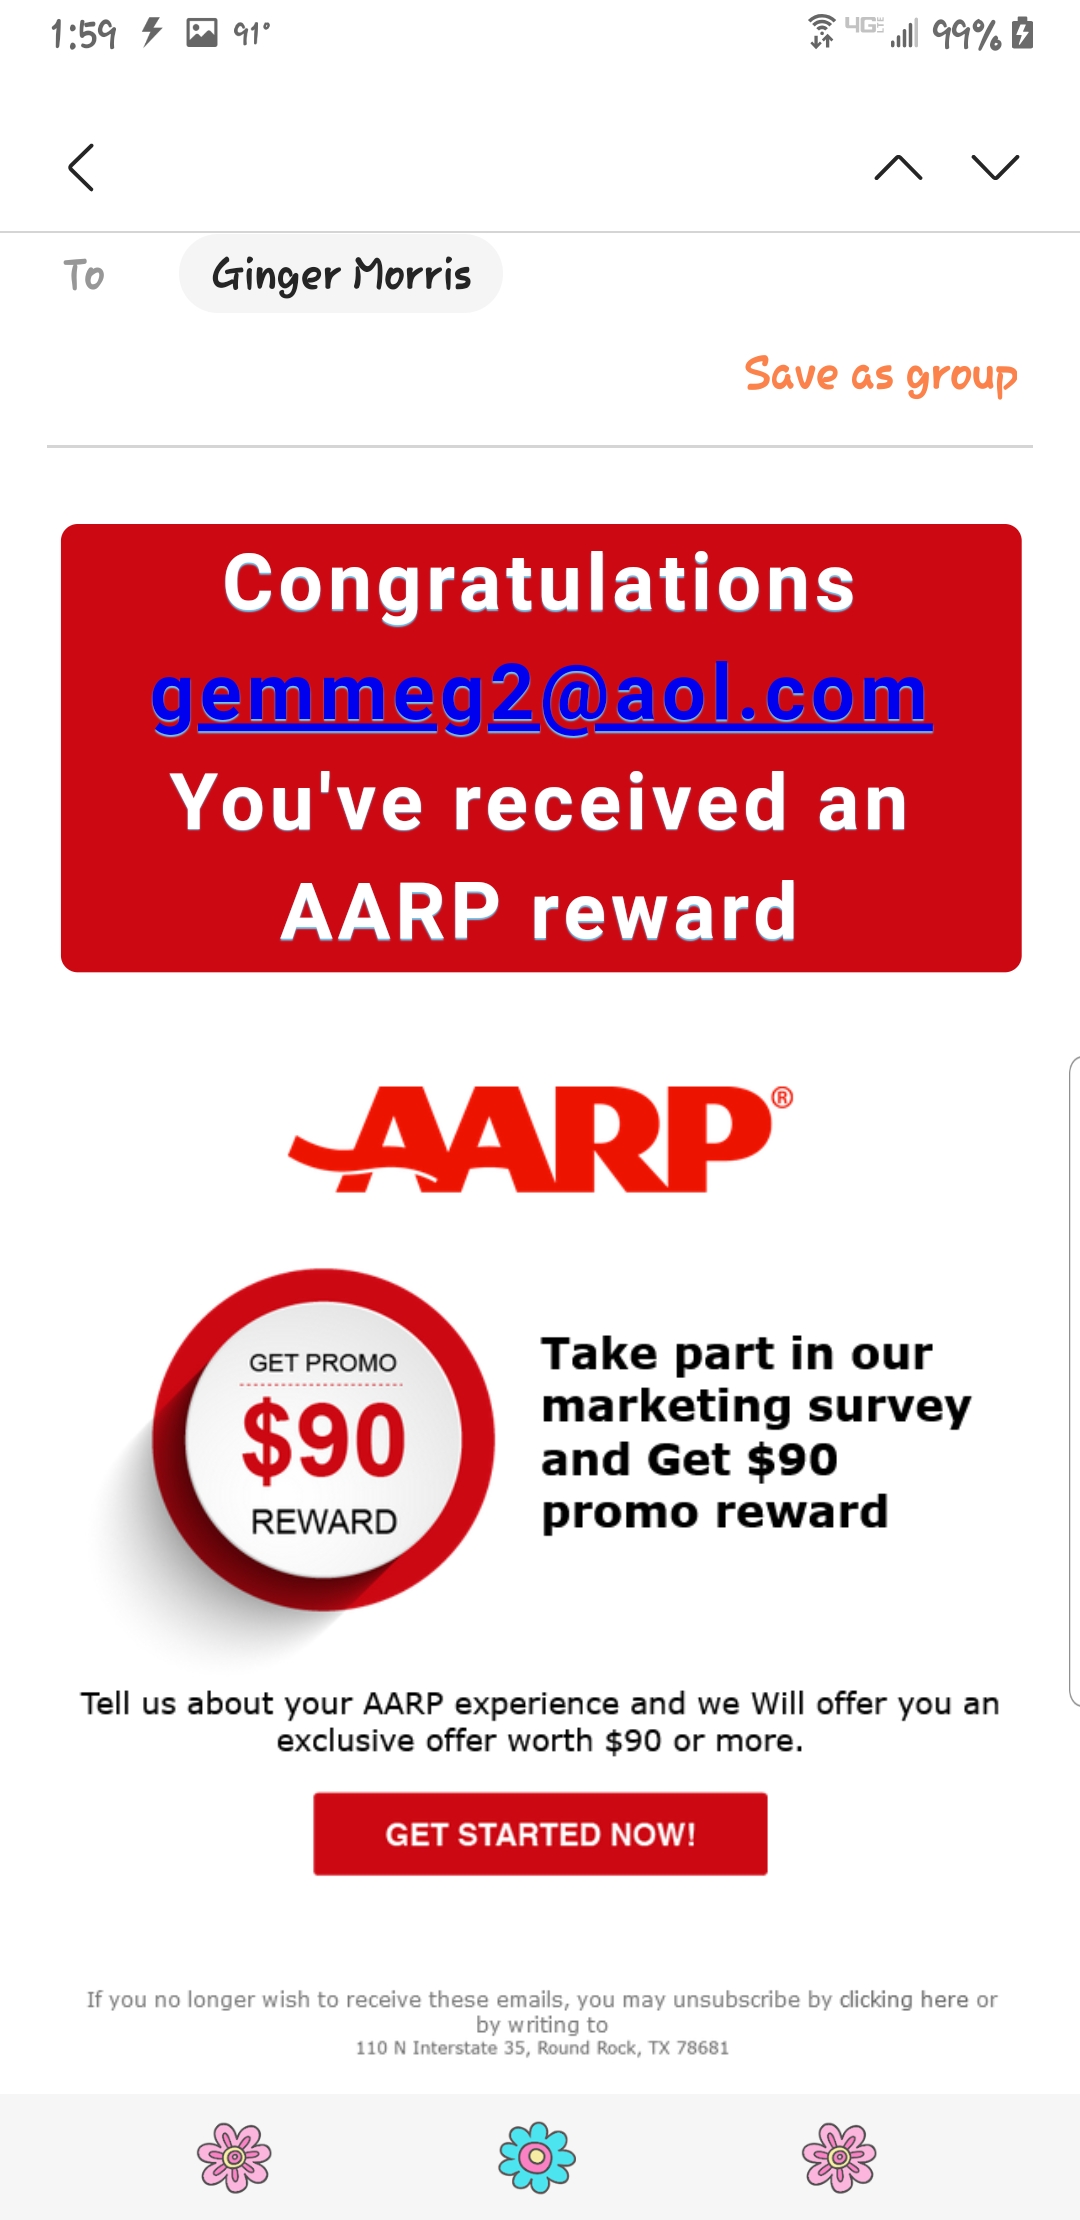 Free Games and Puzzles, an AARP Member Benefit